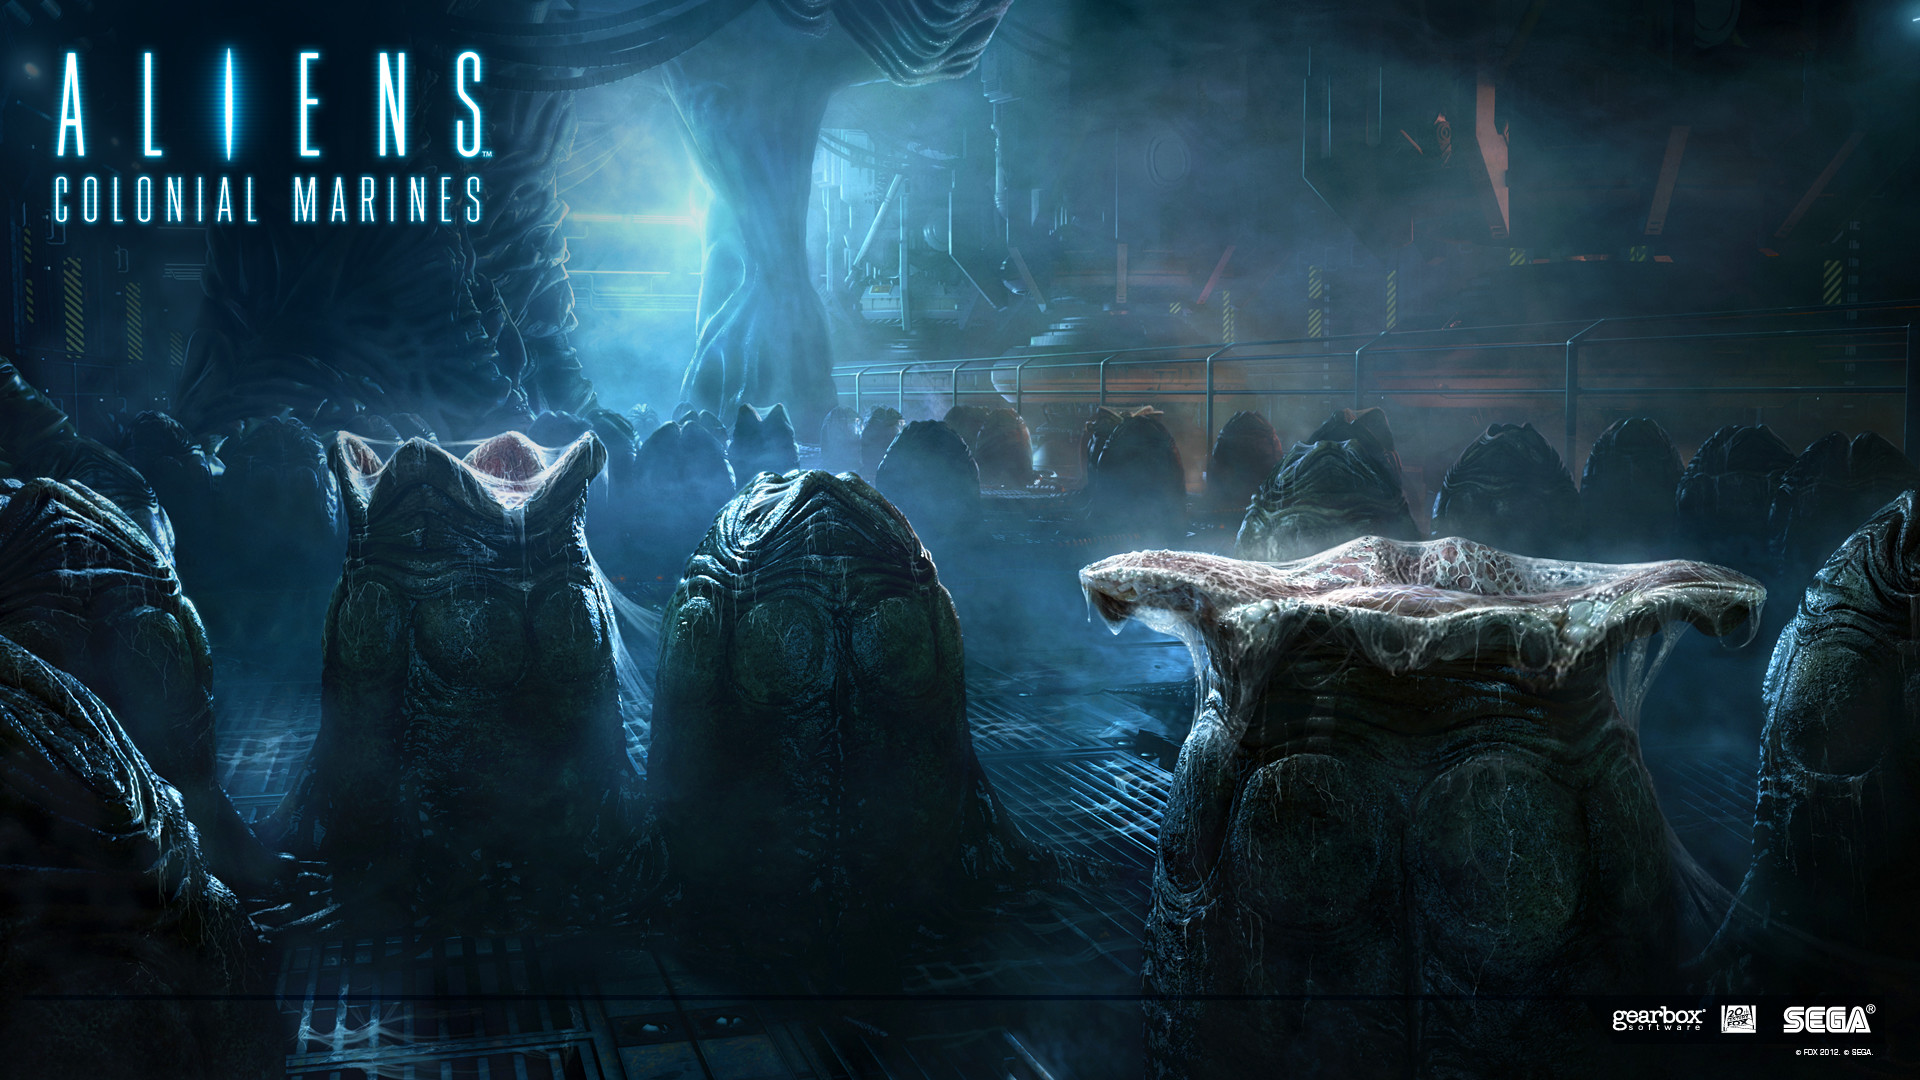 1920x1080 8392655825_0344ef7fd6_o Another New Aliens: Colonial Marines Wallpaper